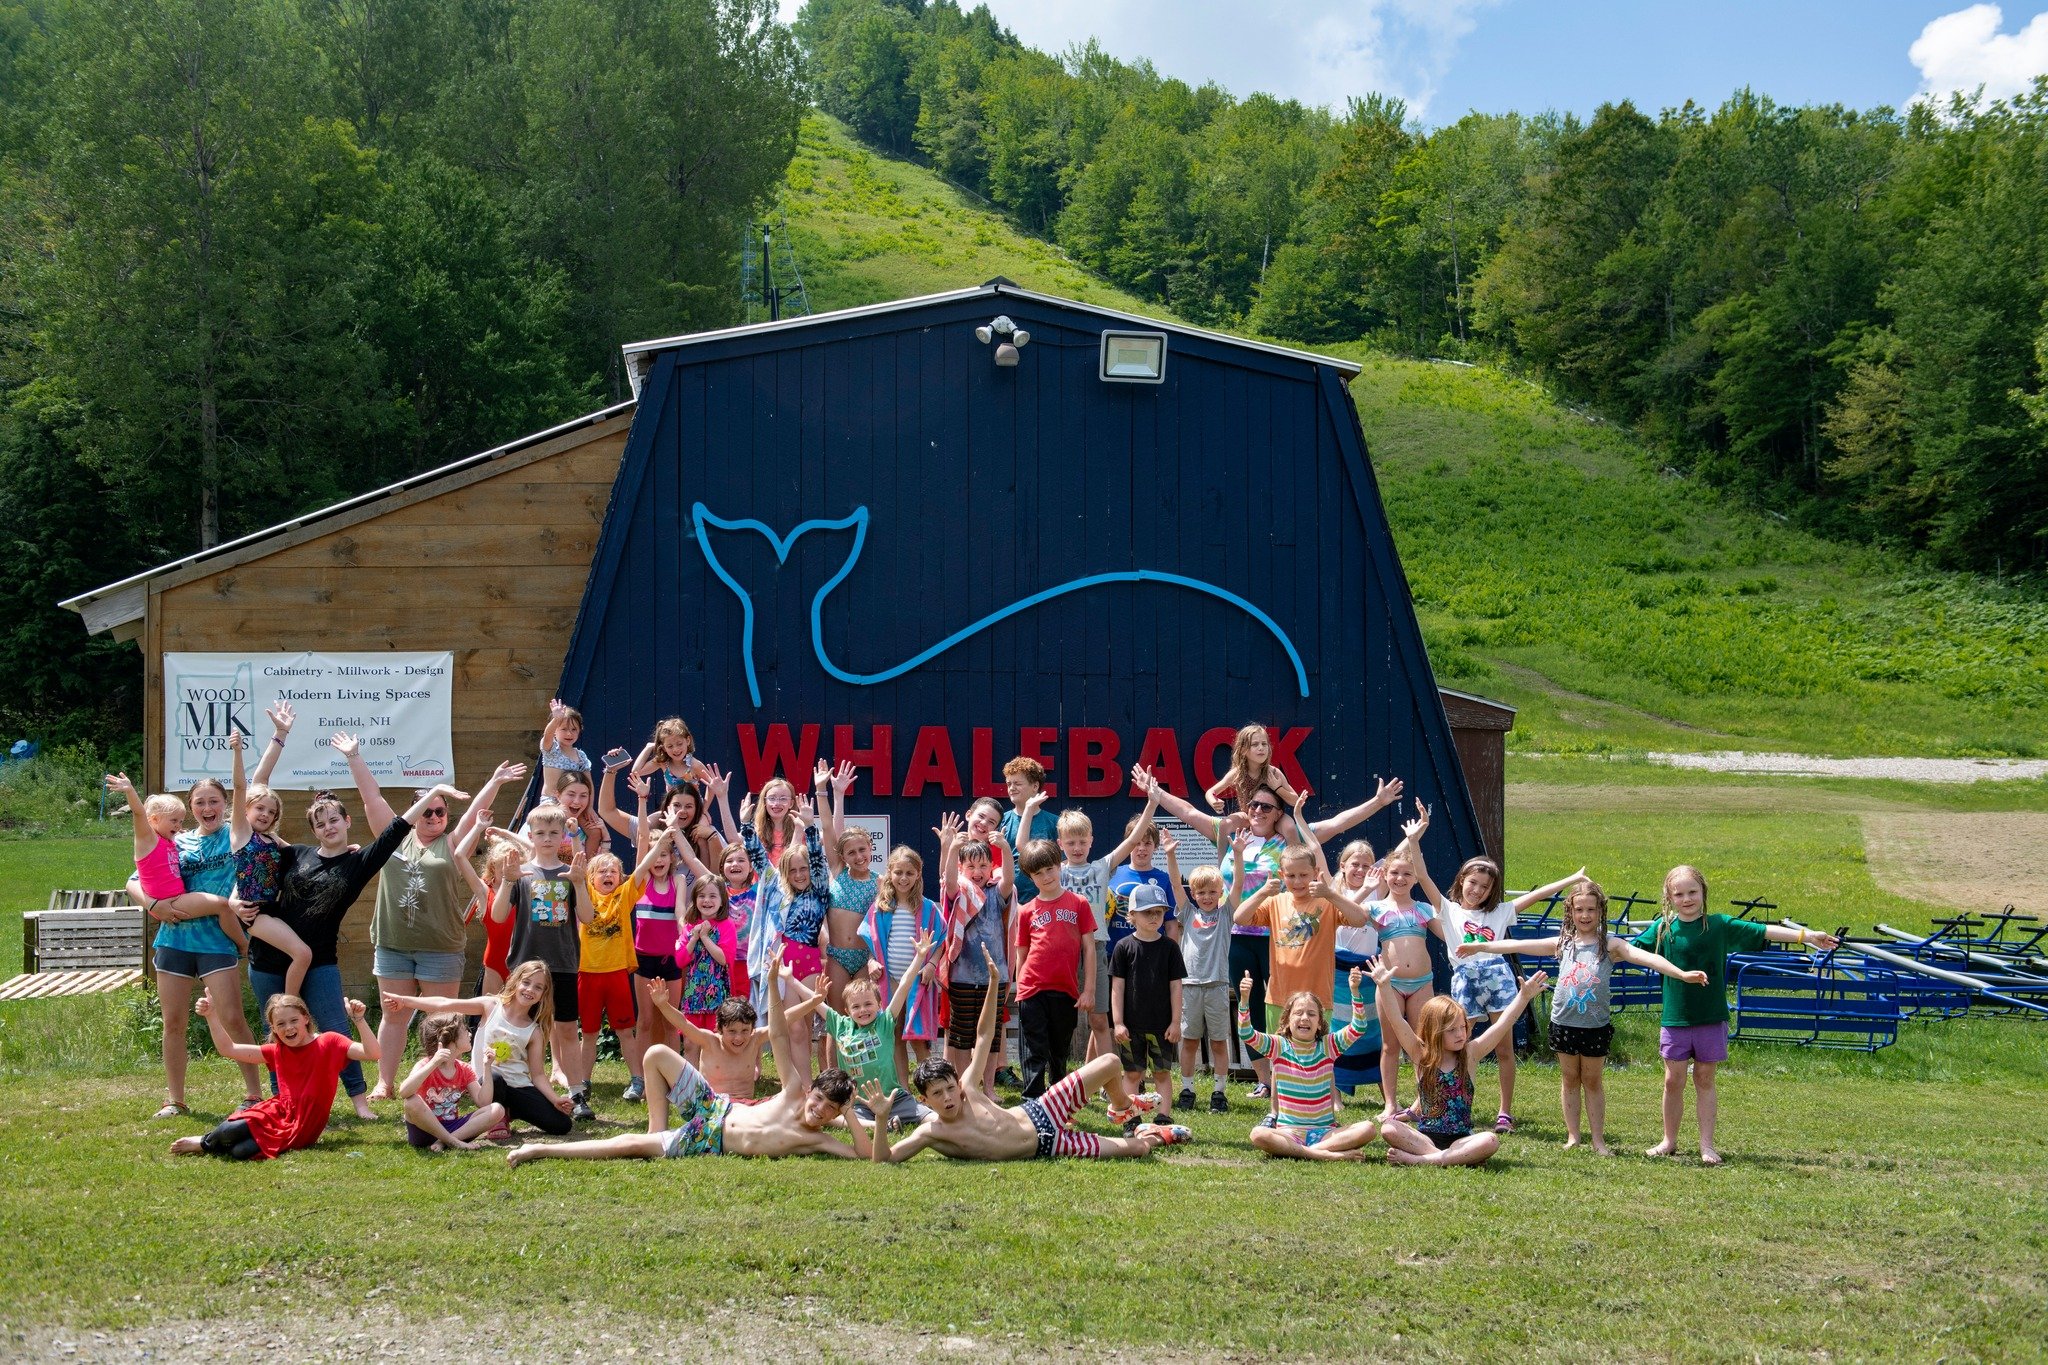 Seeking a fun, engaging summer camp for your child? Check out Whaleback Mountain Summer Day Camp for ages 5-10! Our camp features a mix of nature exploration, arts, sports, and more, all designed to foster learning and friendships in a safe environme